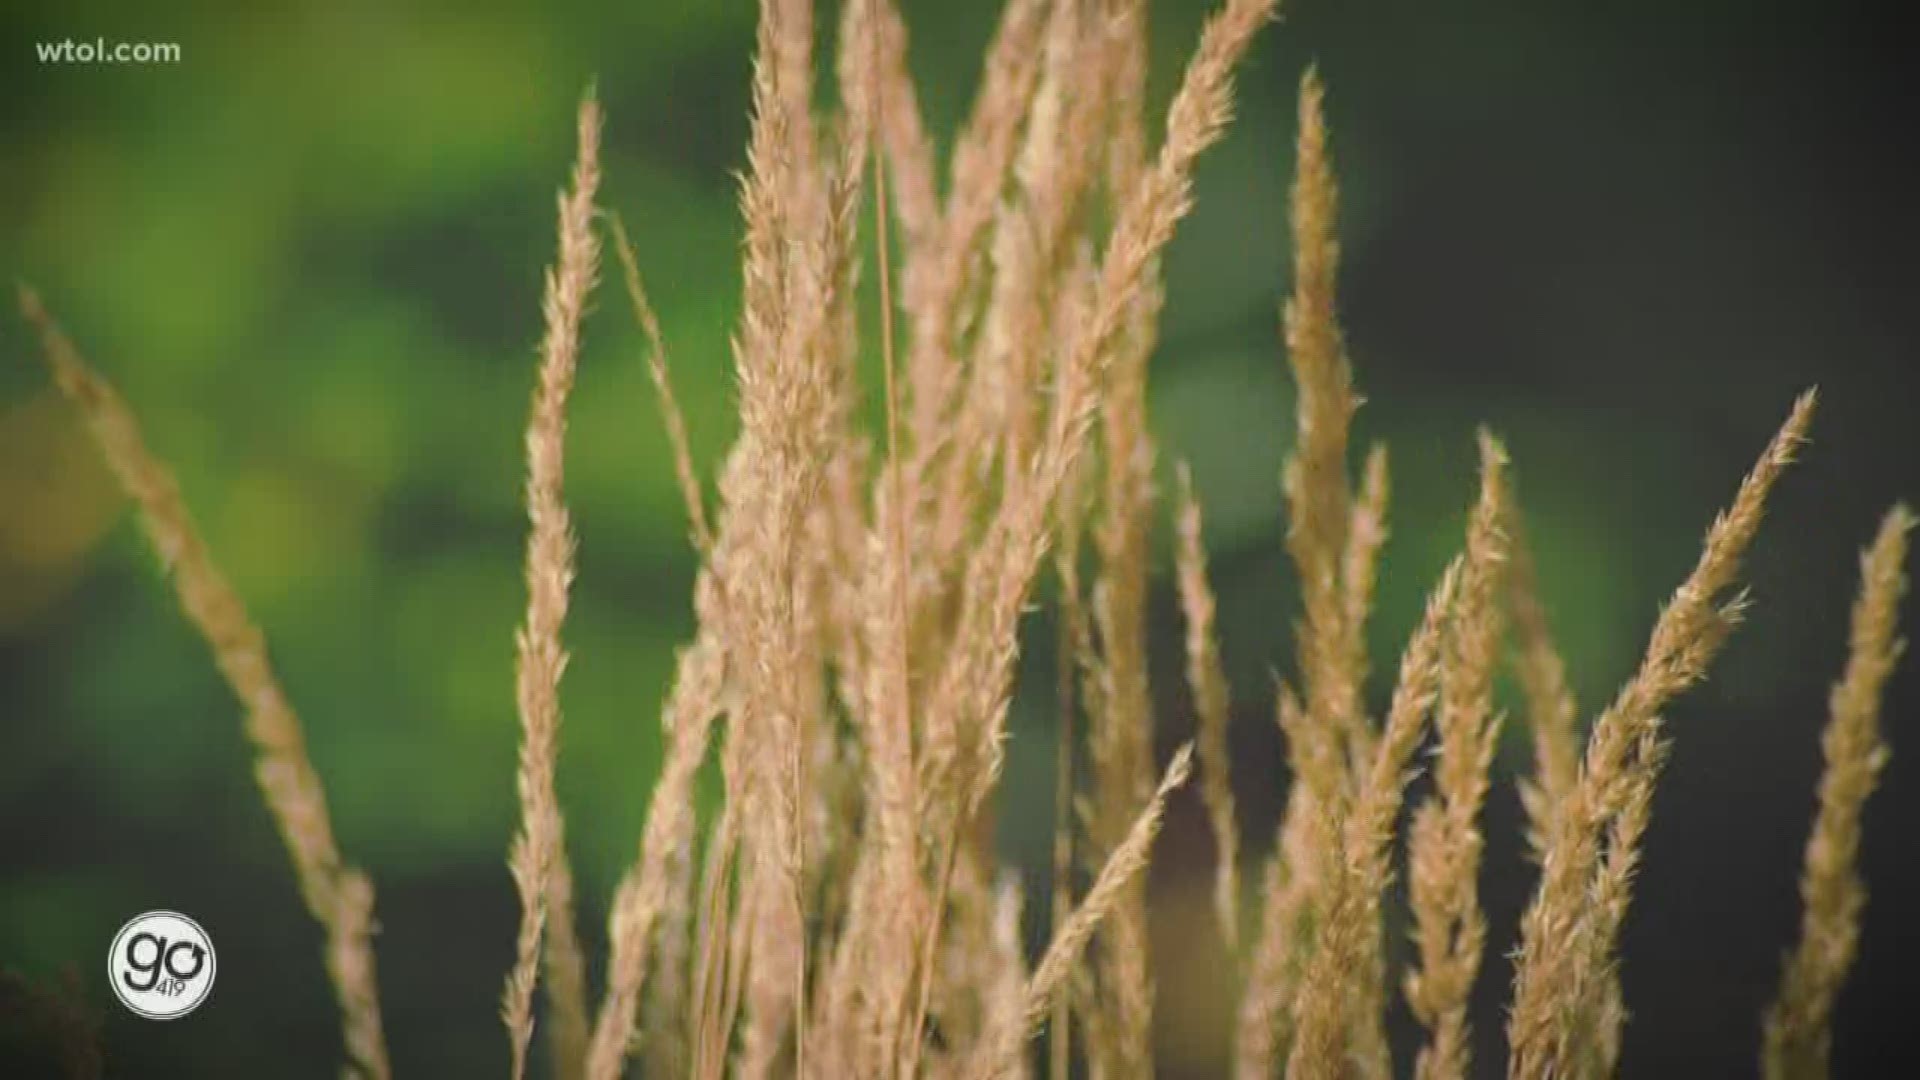 Jenny Amstutz from Nature's Corner explains the best practices for growing your grass through fall and winter.